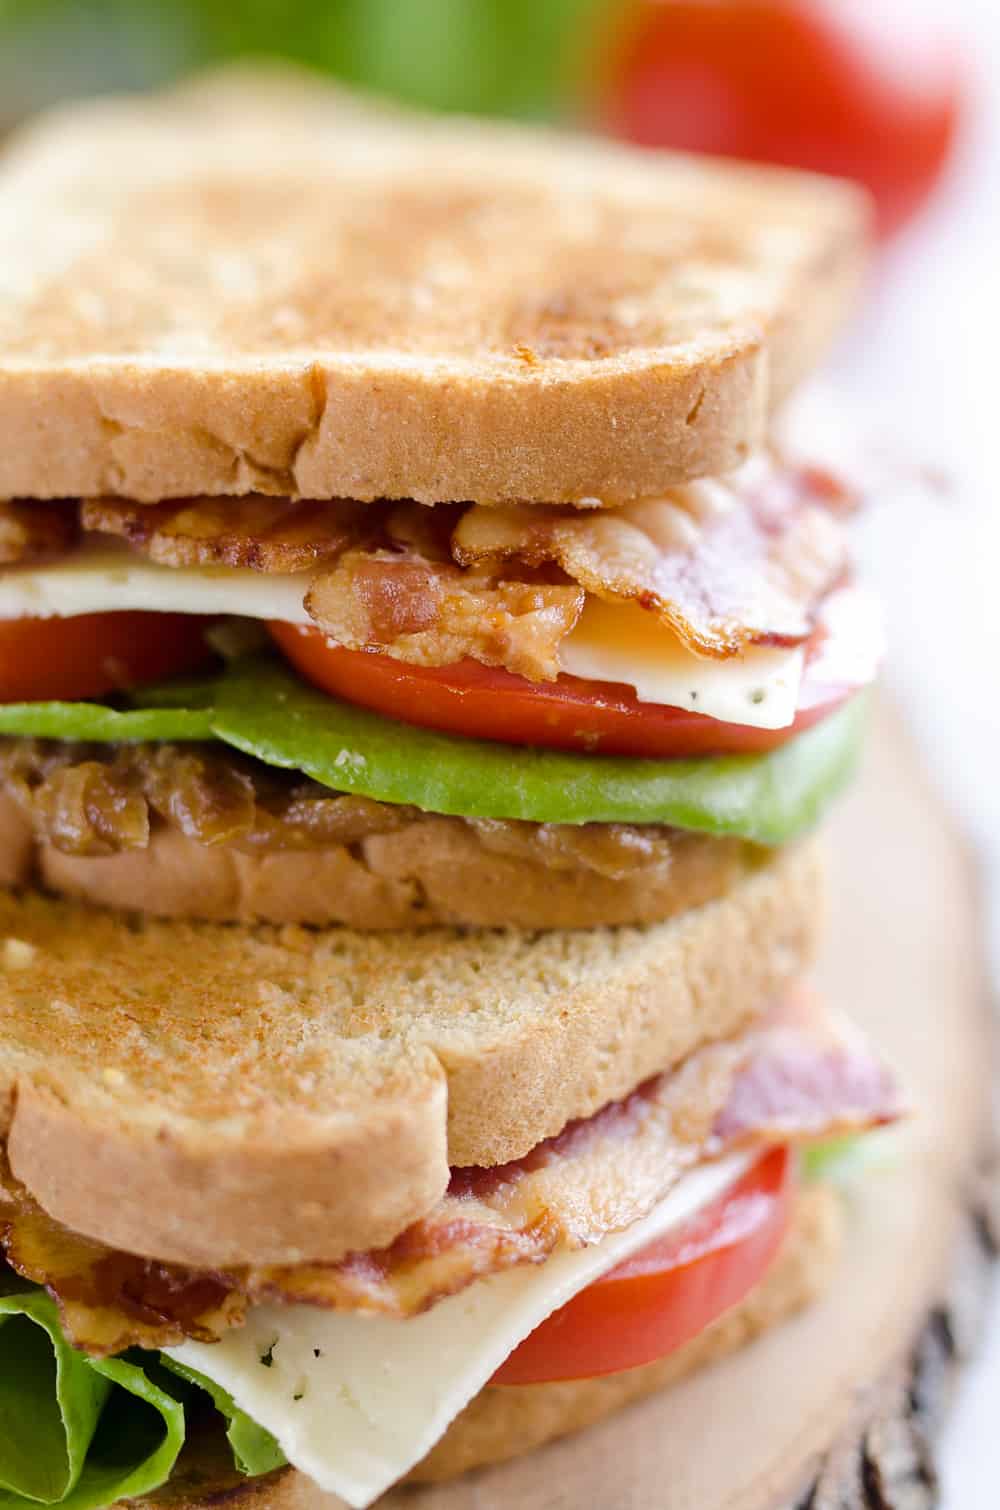 This Ultimate BLT is loaded with all the traditional goodness of a BLT, but with a flavorful twist. The addition of sweet caramelized onions and Havarti cheese take this sandwich to the next level!